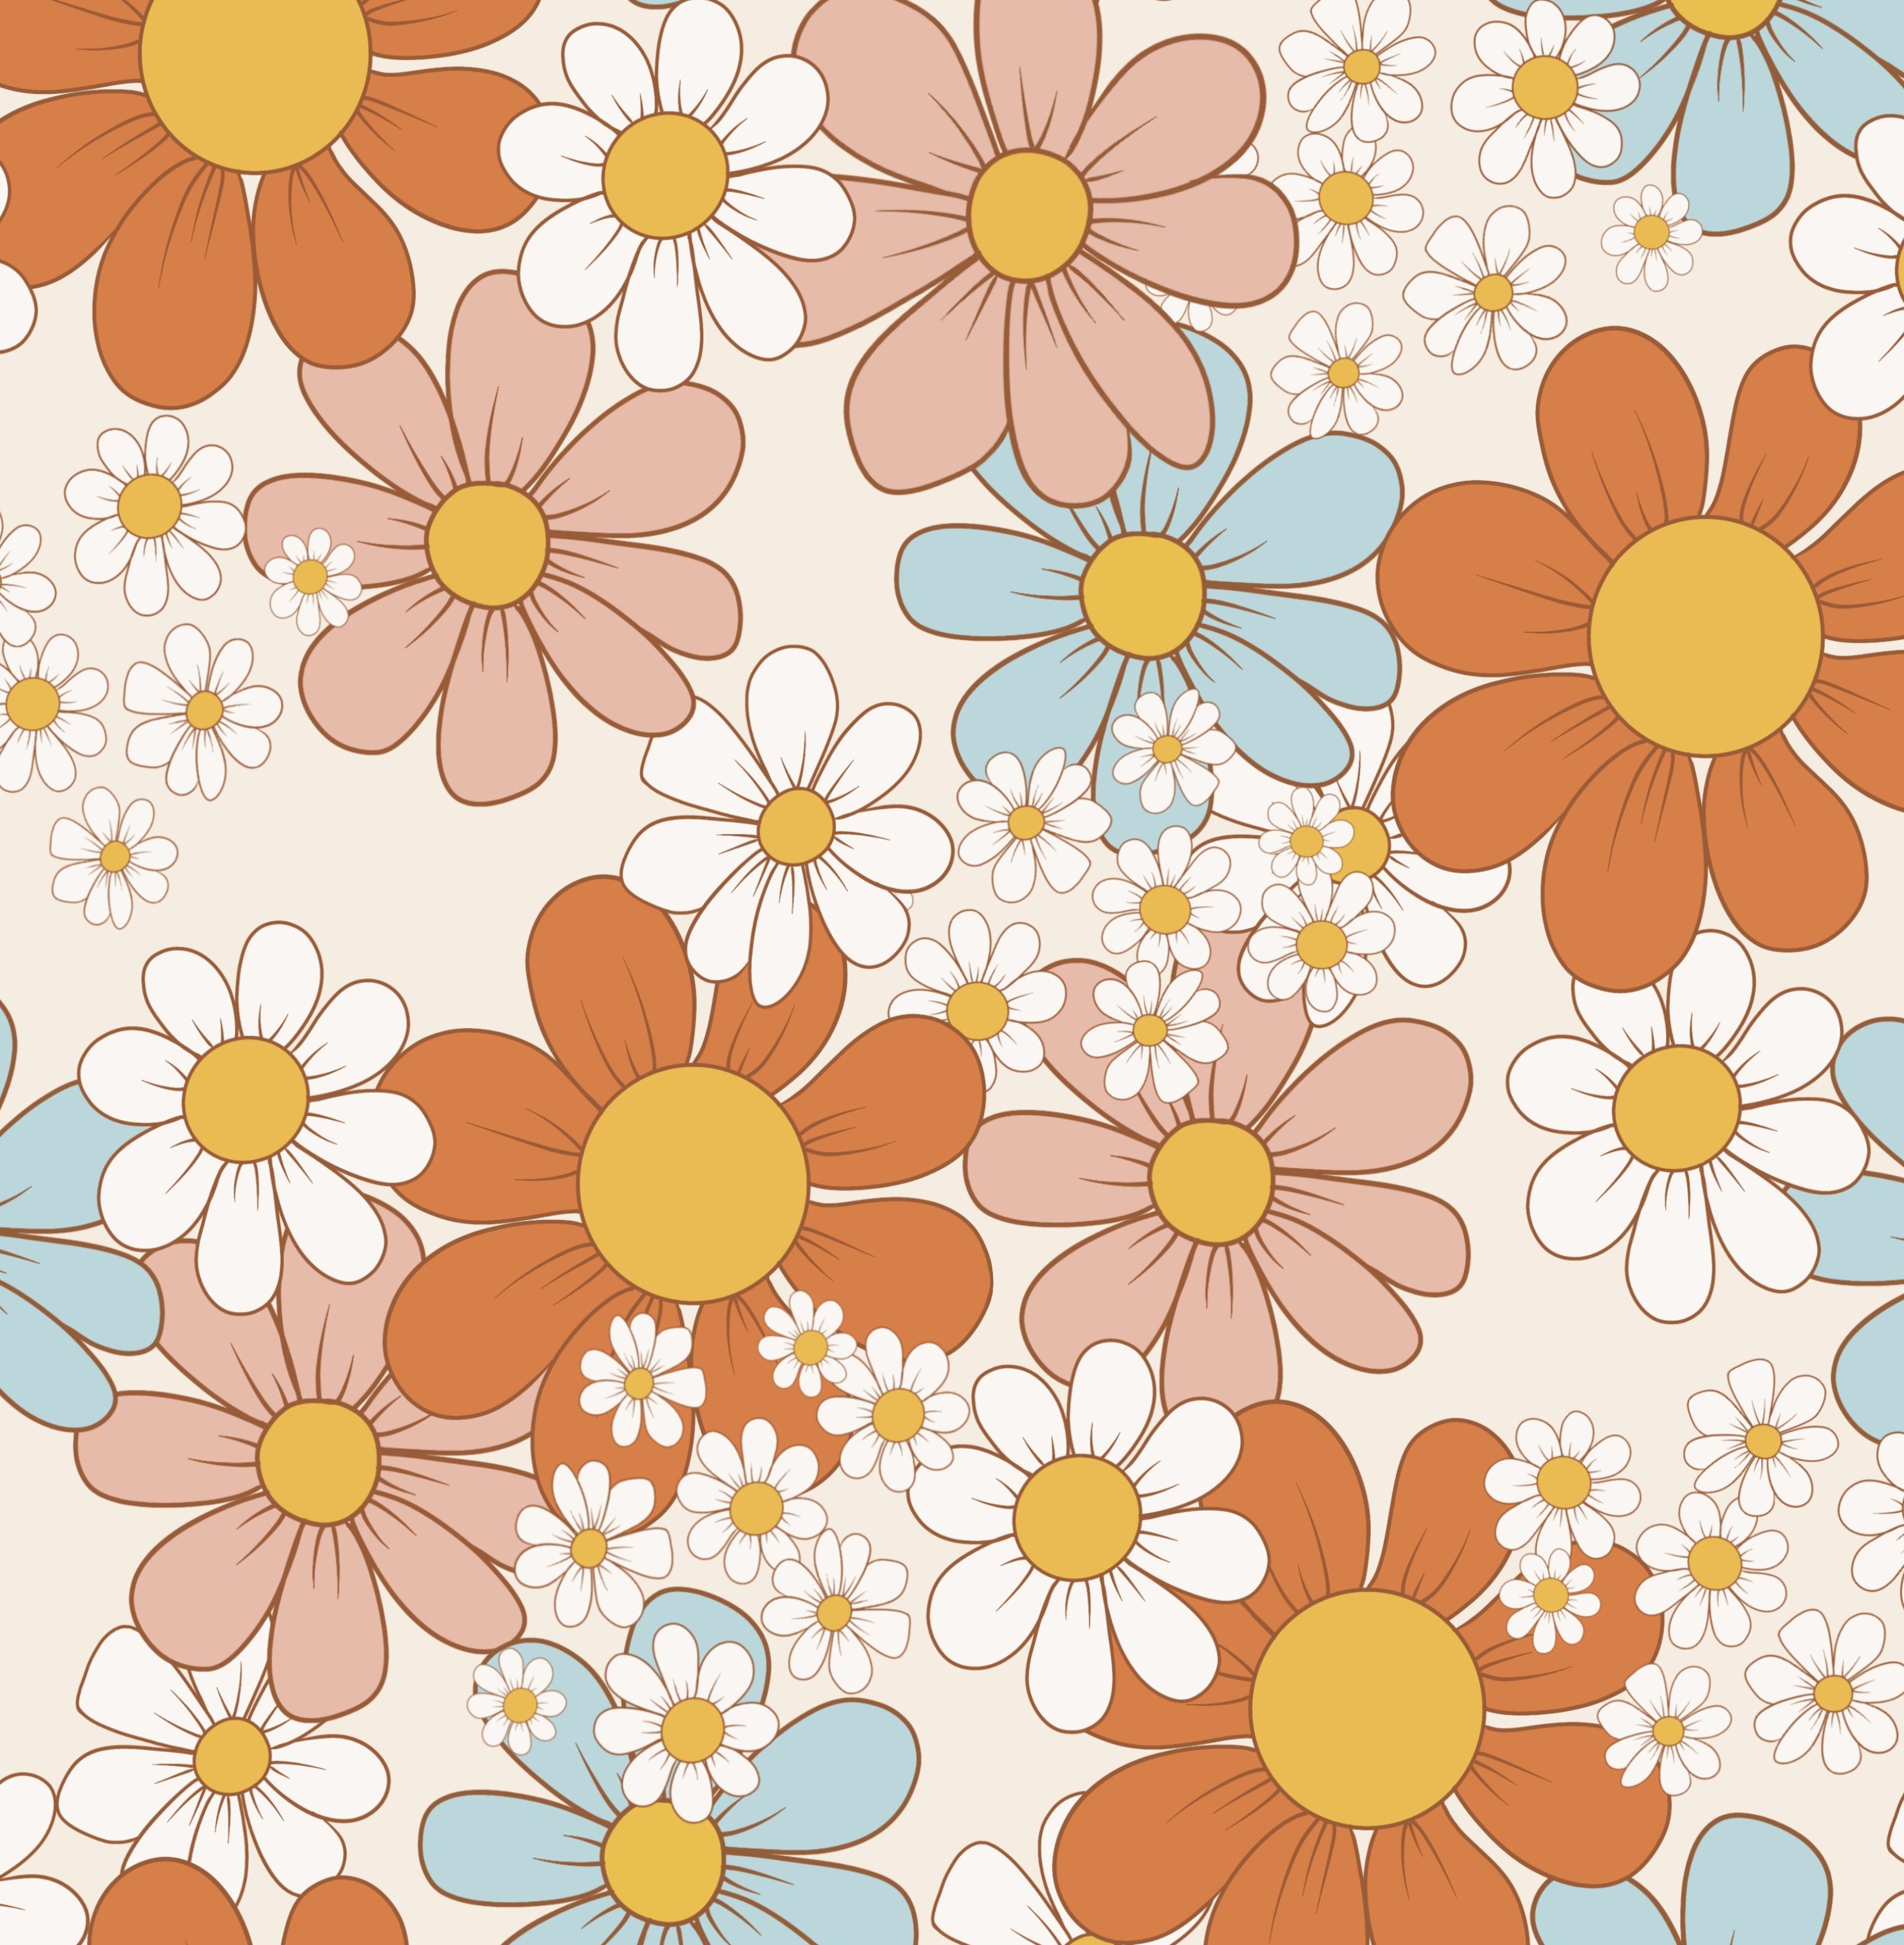 Floral seamless surface pattern design collections digital download